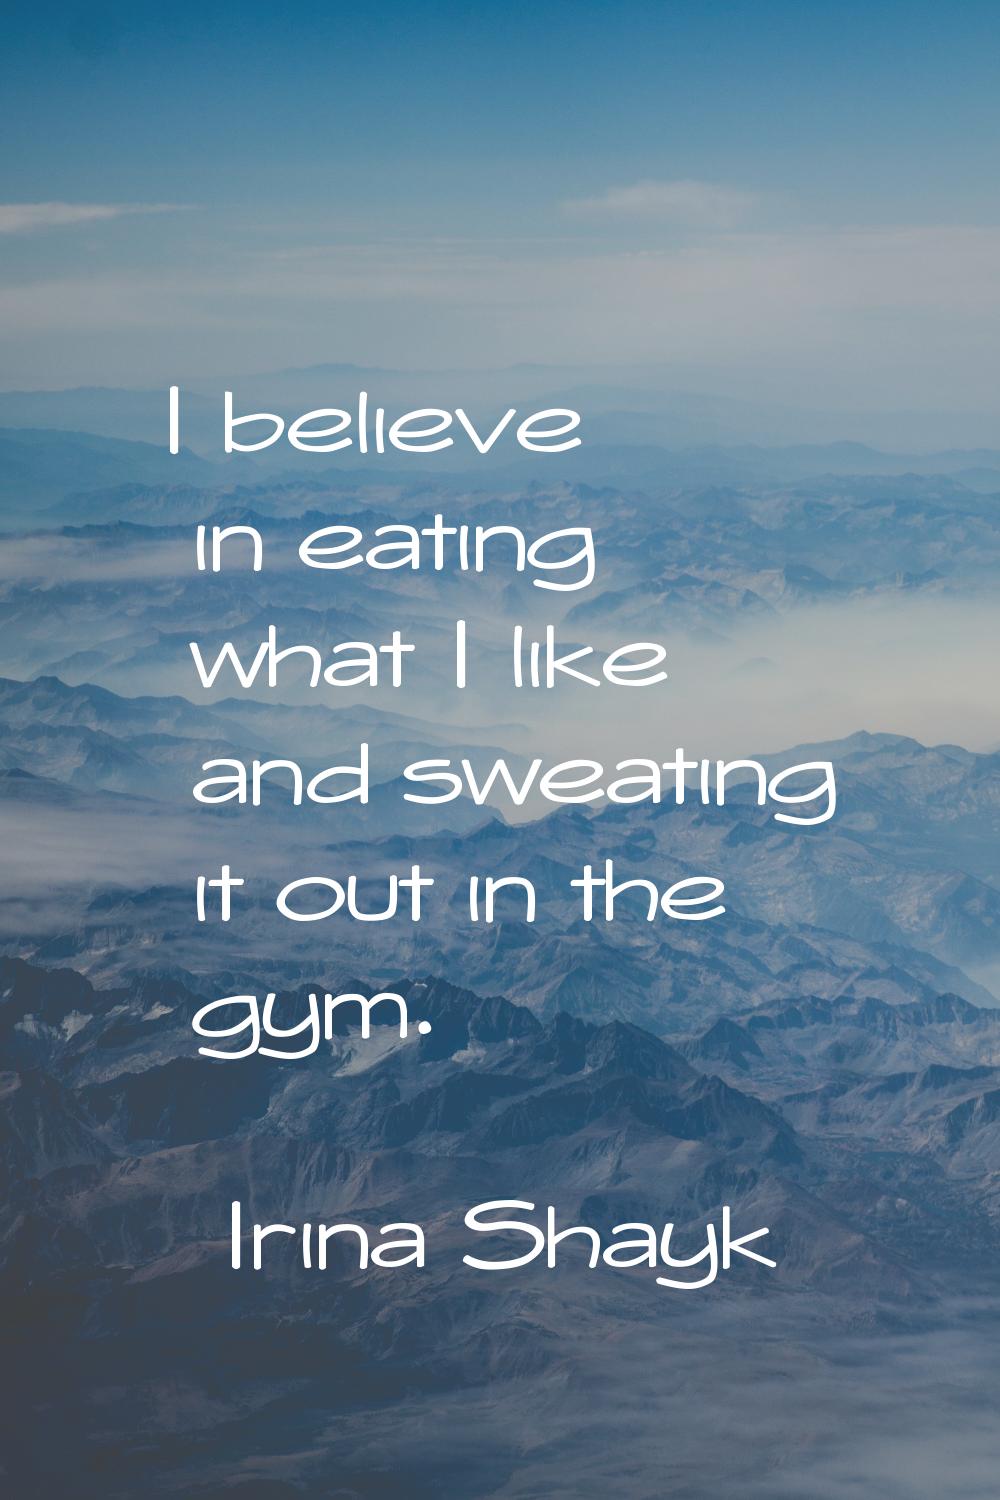 I believe in eating what I like and sweating it out in the gym.